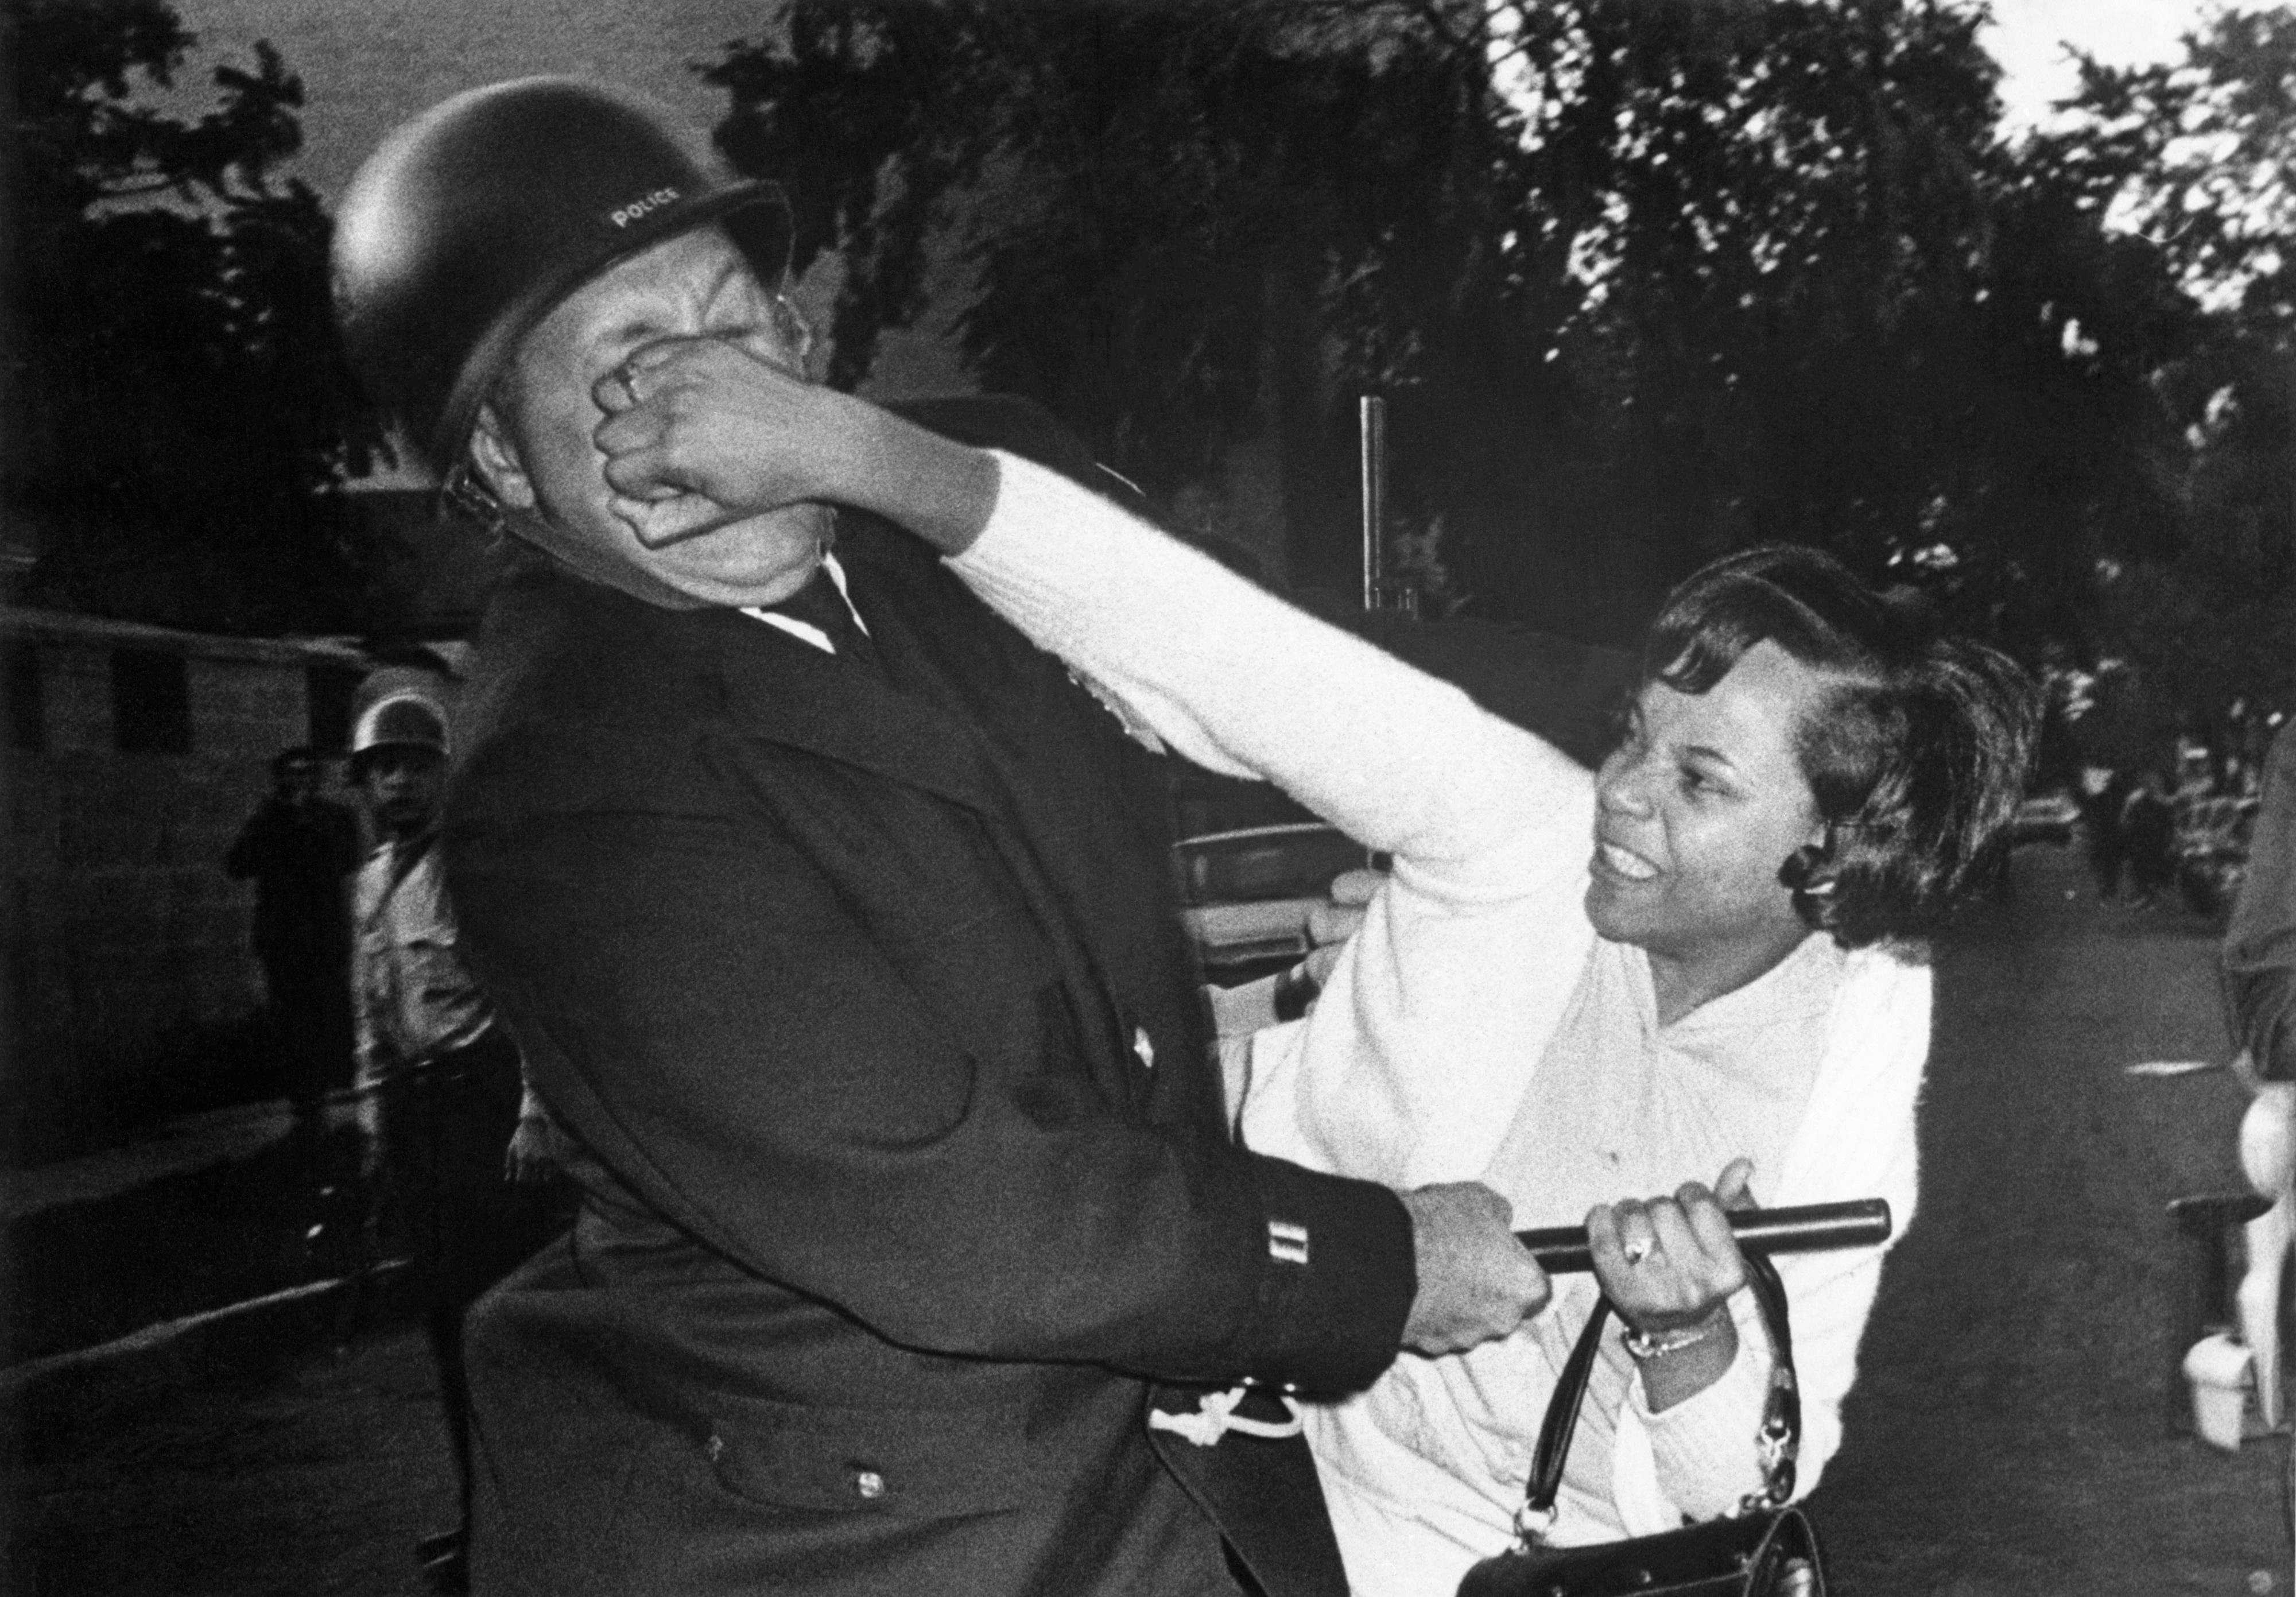 A woman struggle with police during the Summer 1967 unrest in Milwaukee.jpg